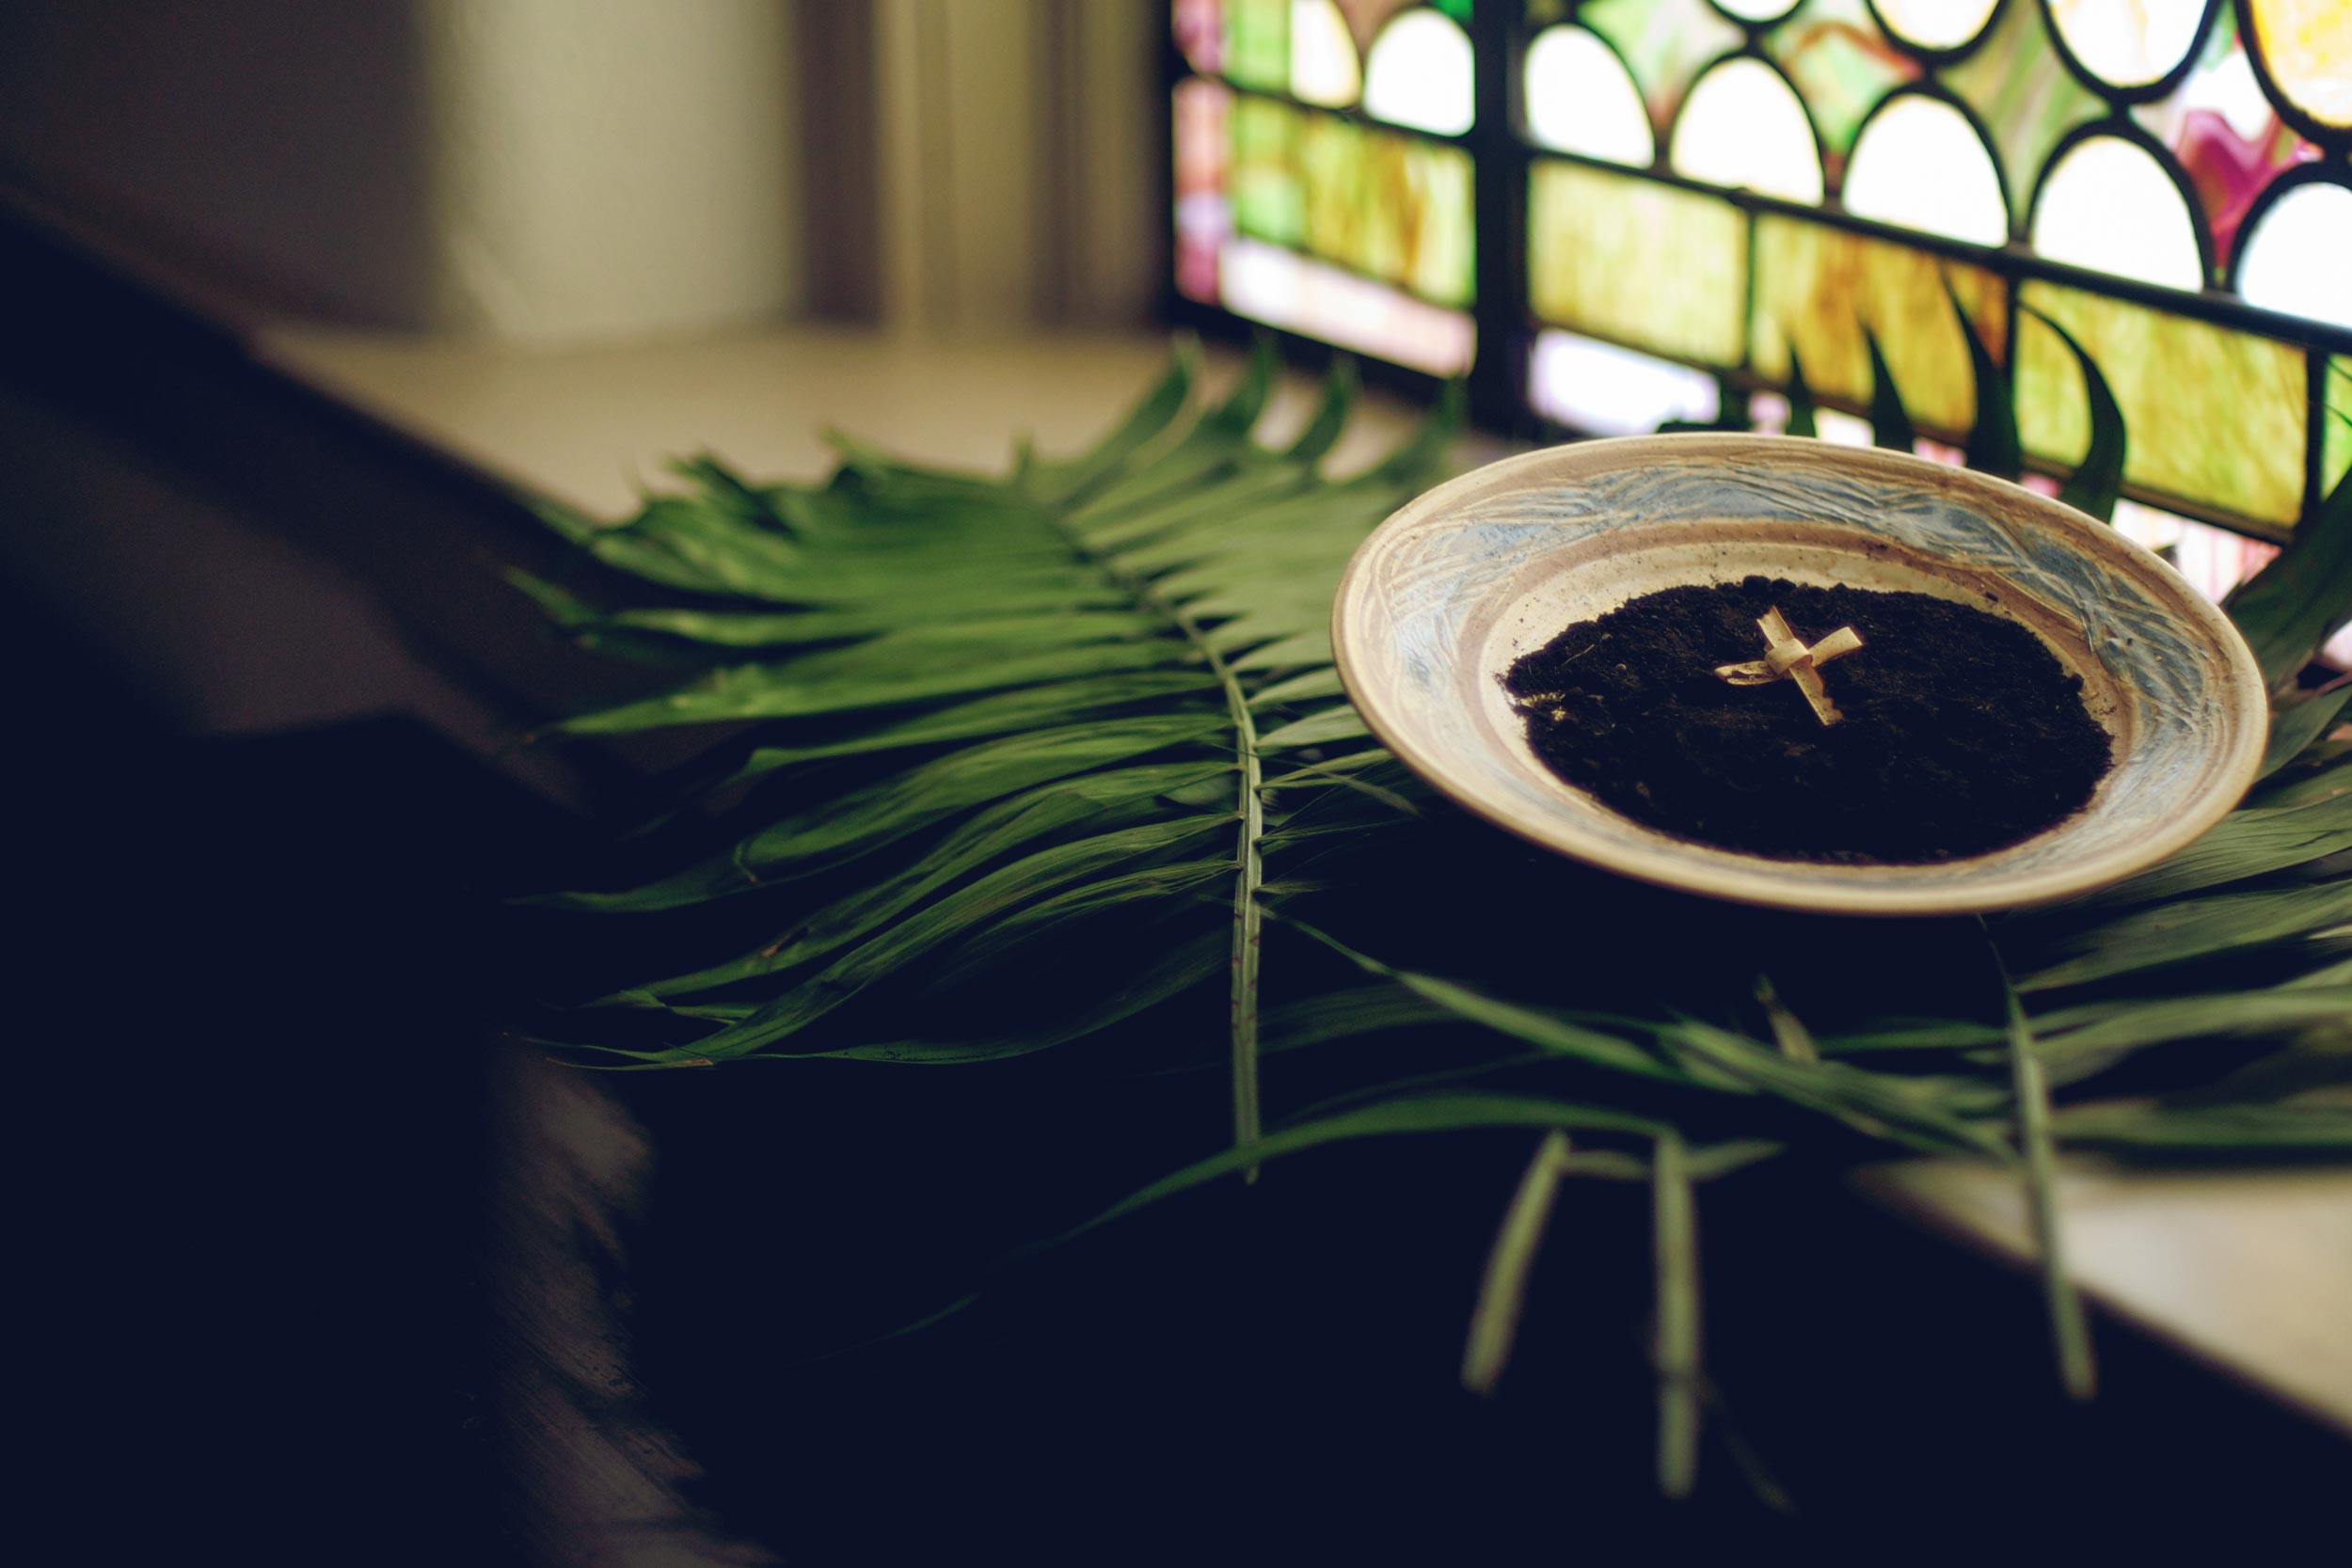 Palm branches on a window sill with ashes in a bowl and a dried palm leaf cross inside